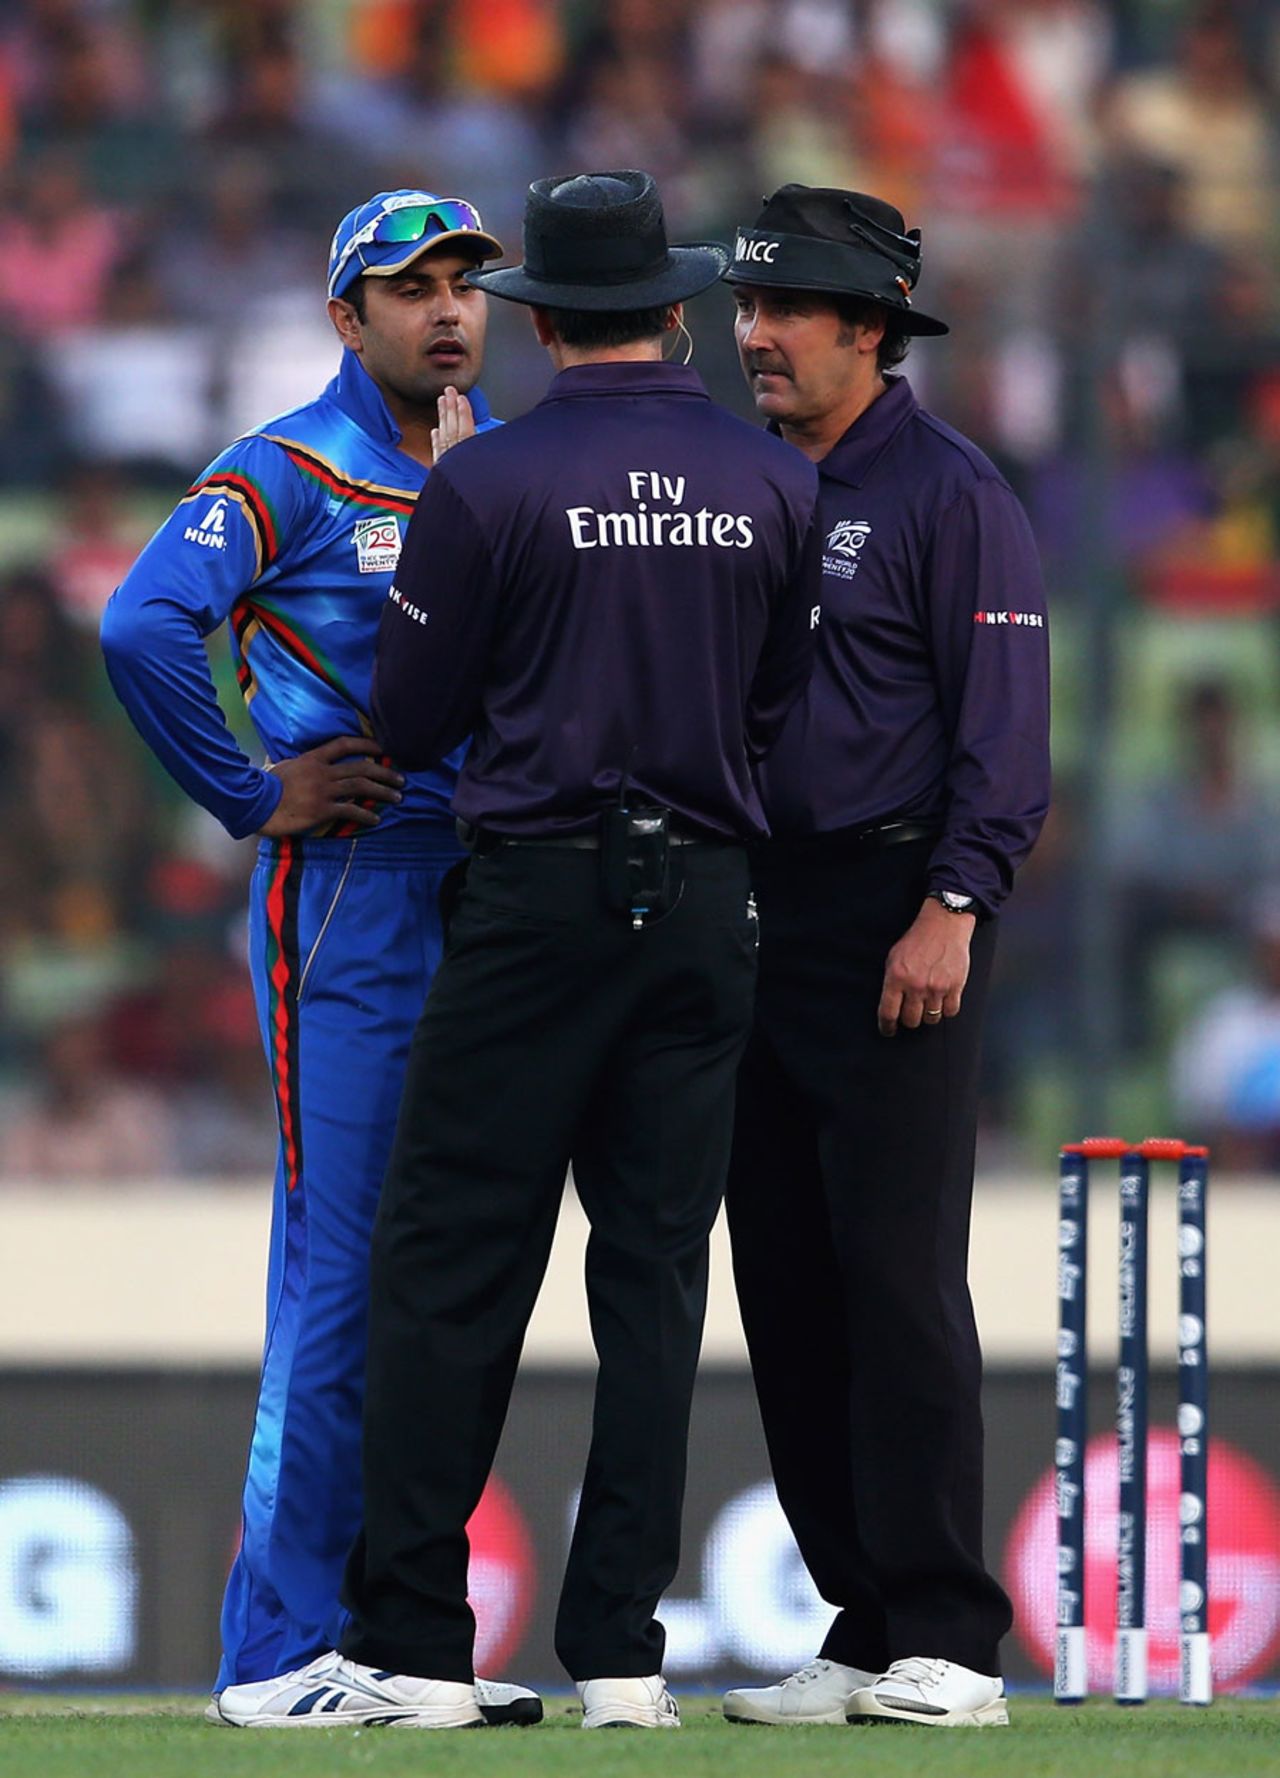 The umpires have a word with Mohammad Nabi after things got heated on the field, Bangladesh v Afghanistan, World T20, Qualifying Group A, March 16, 2014